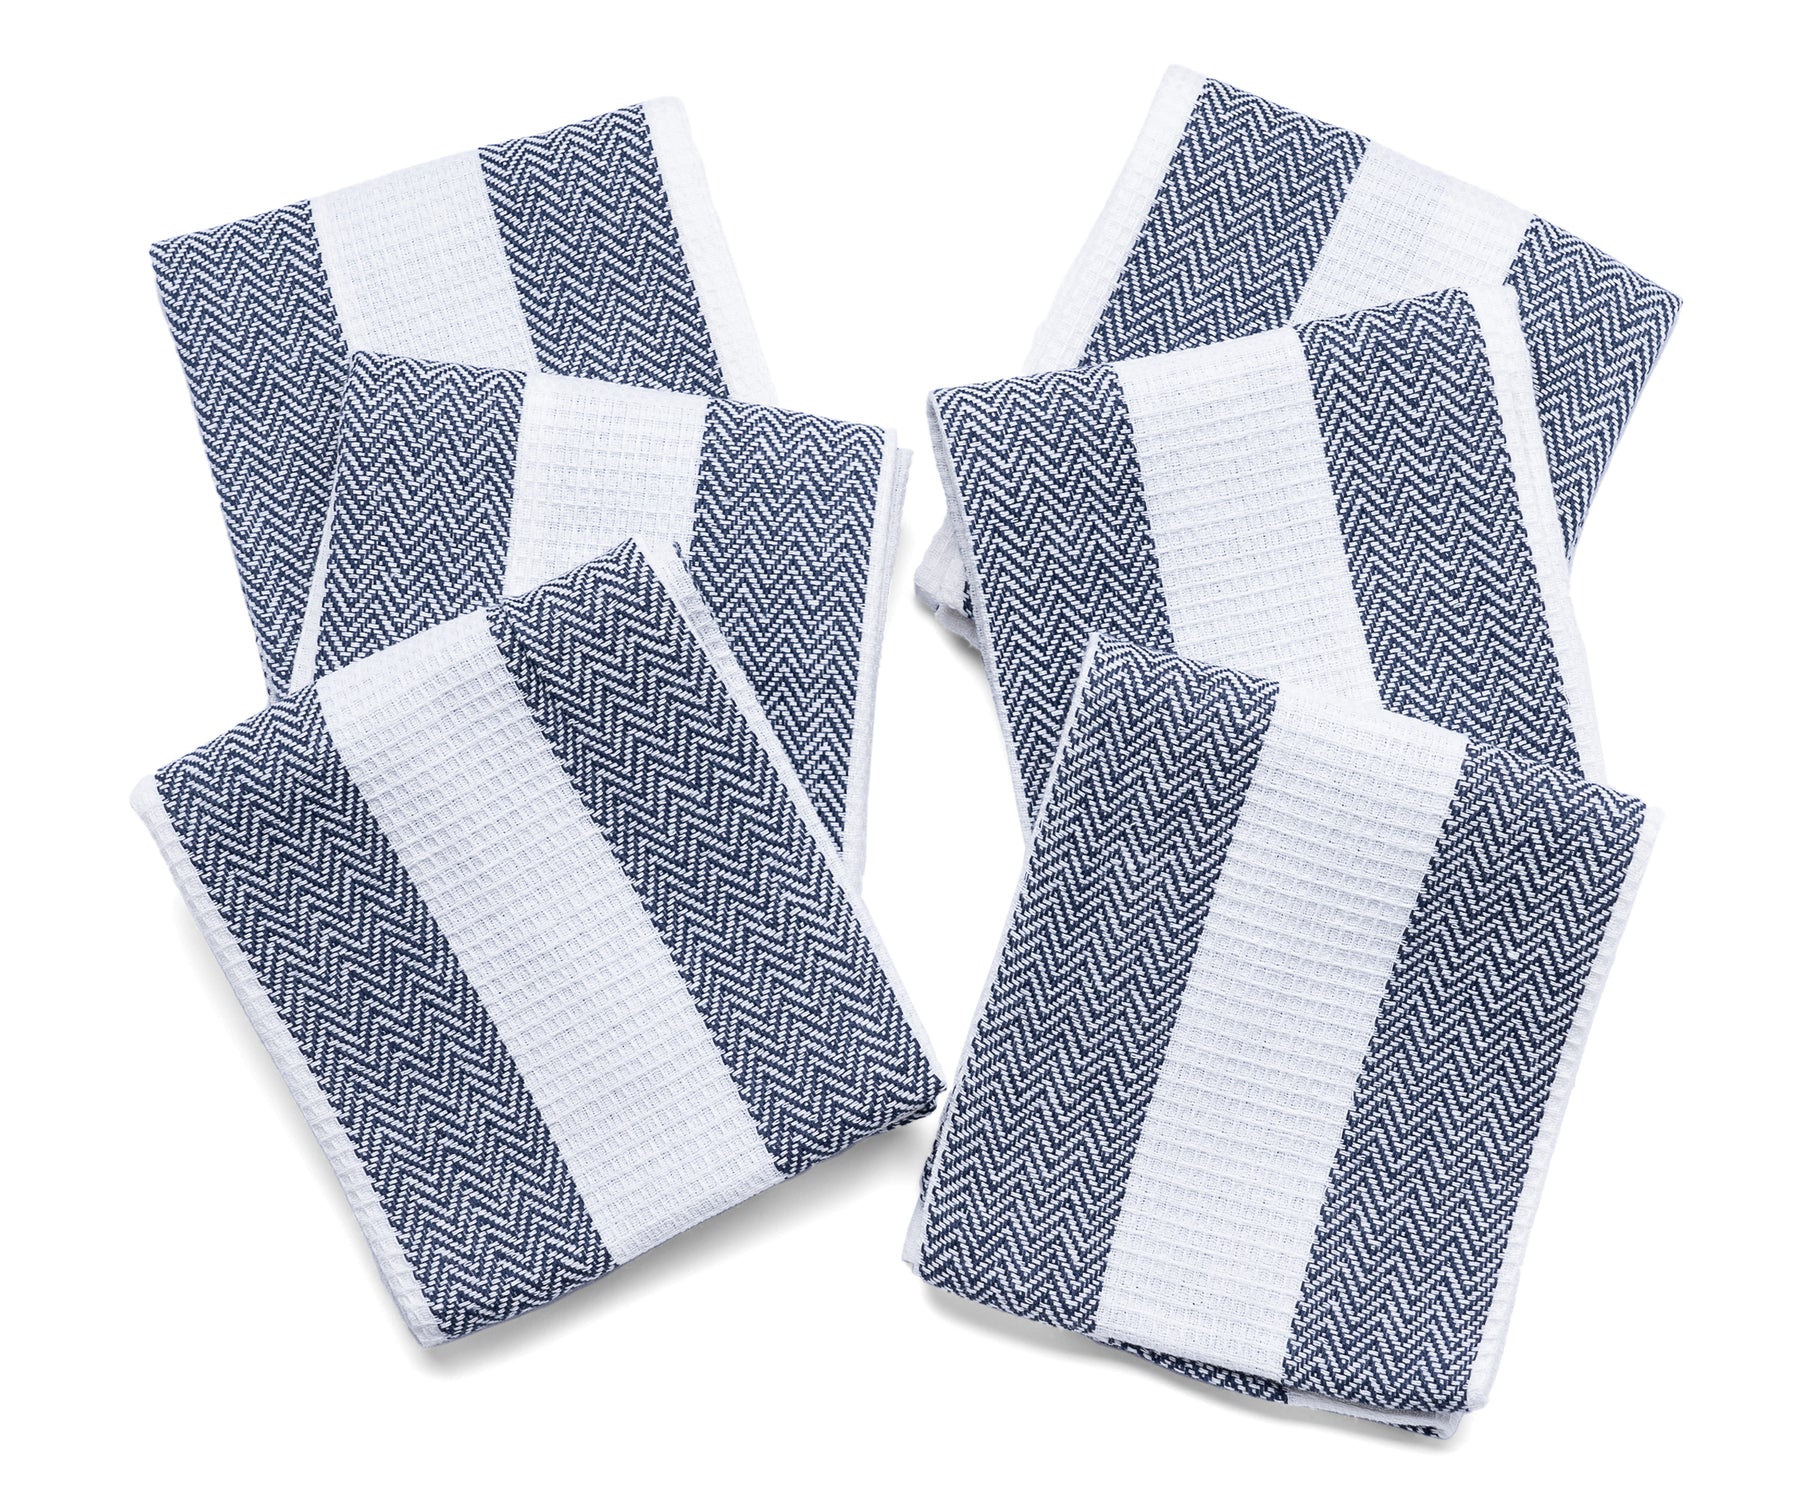 Luxury towels with classic striped detailing.